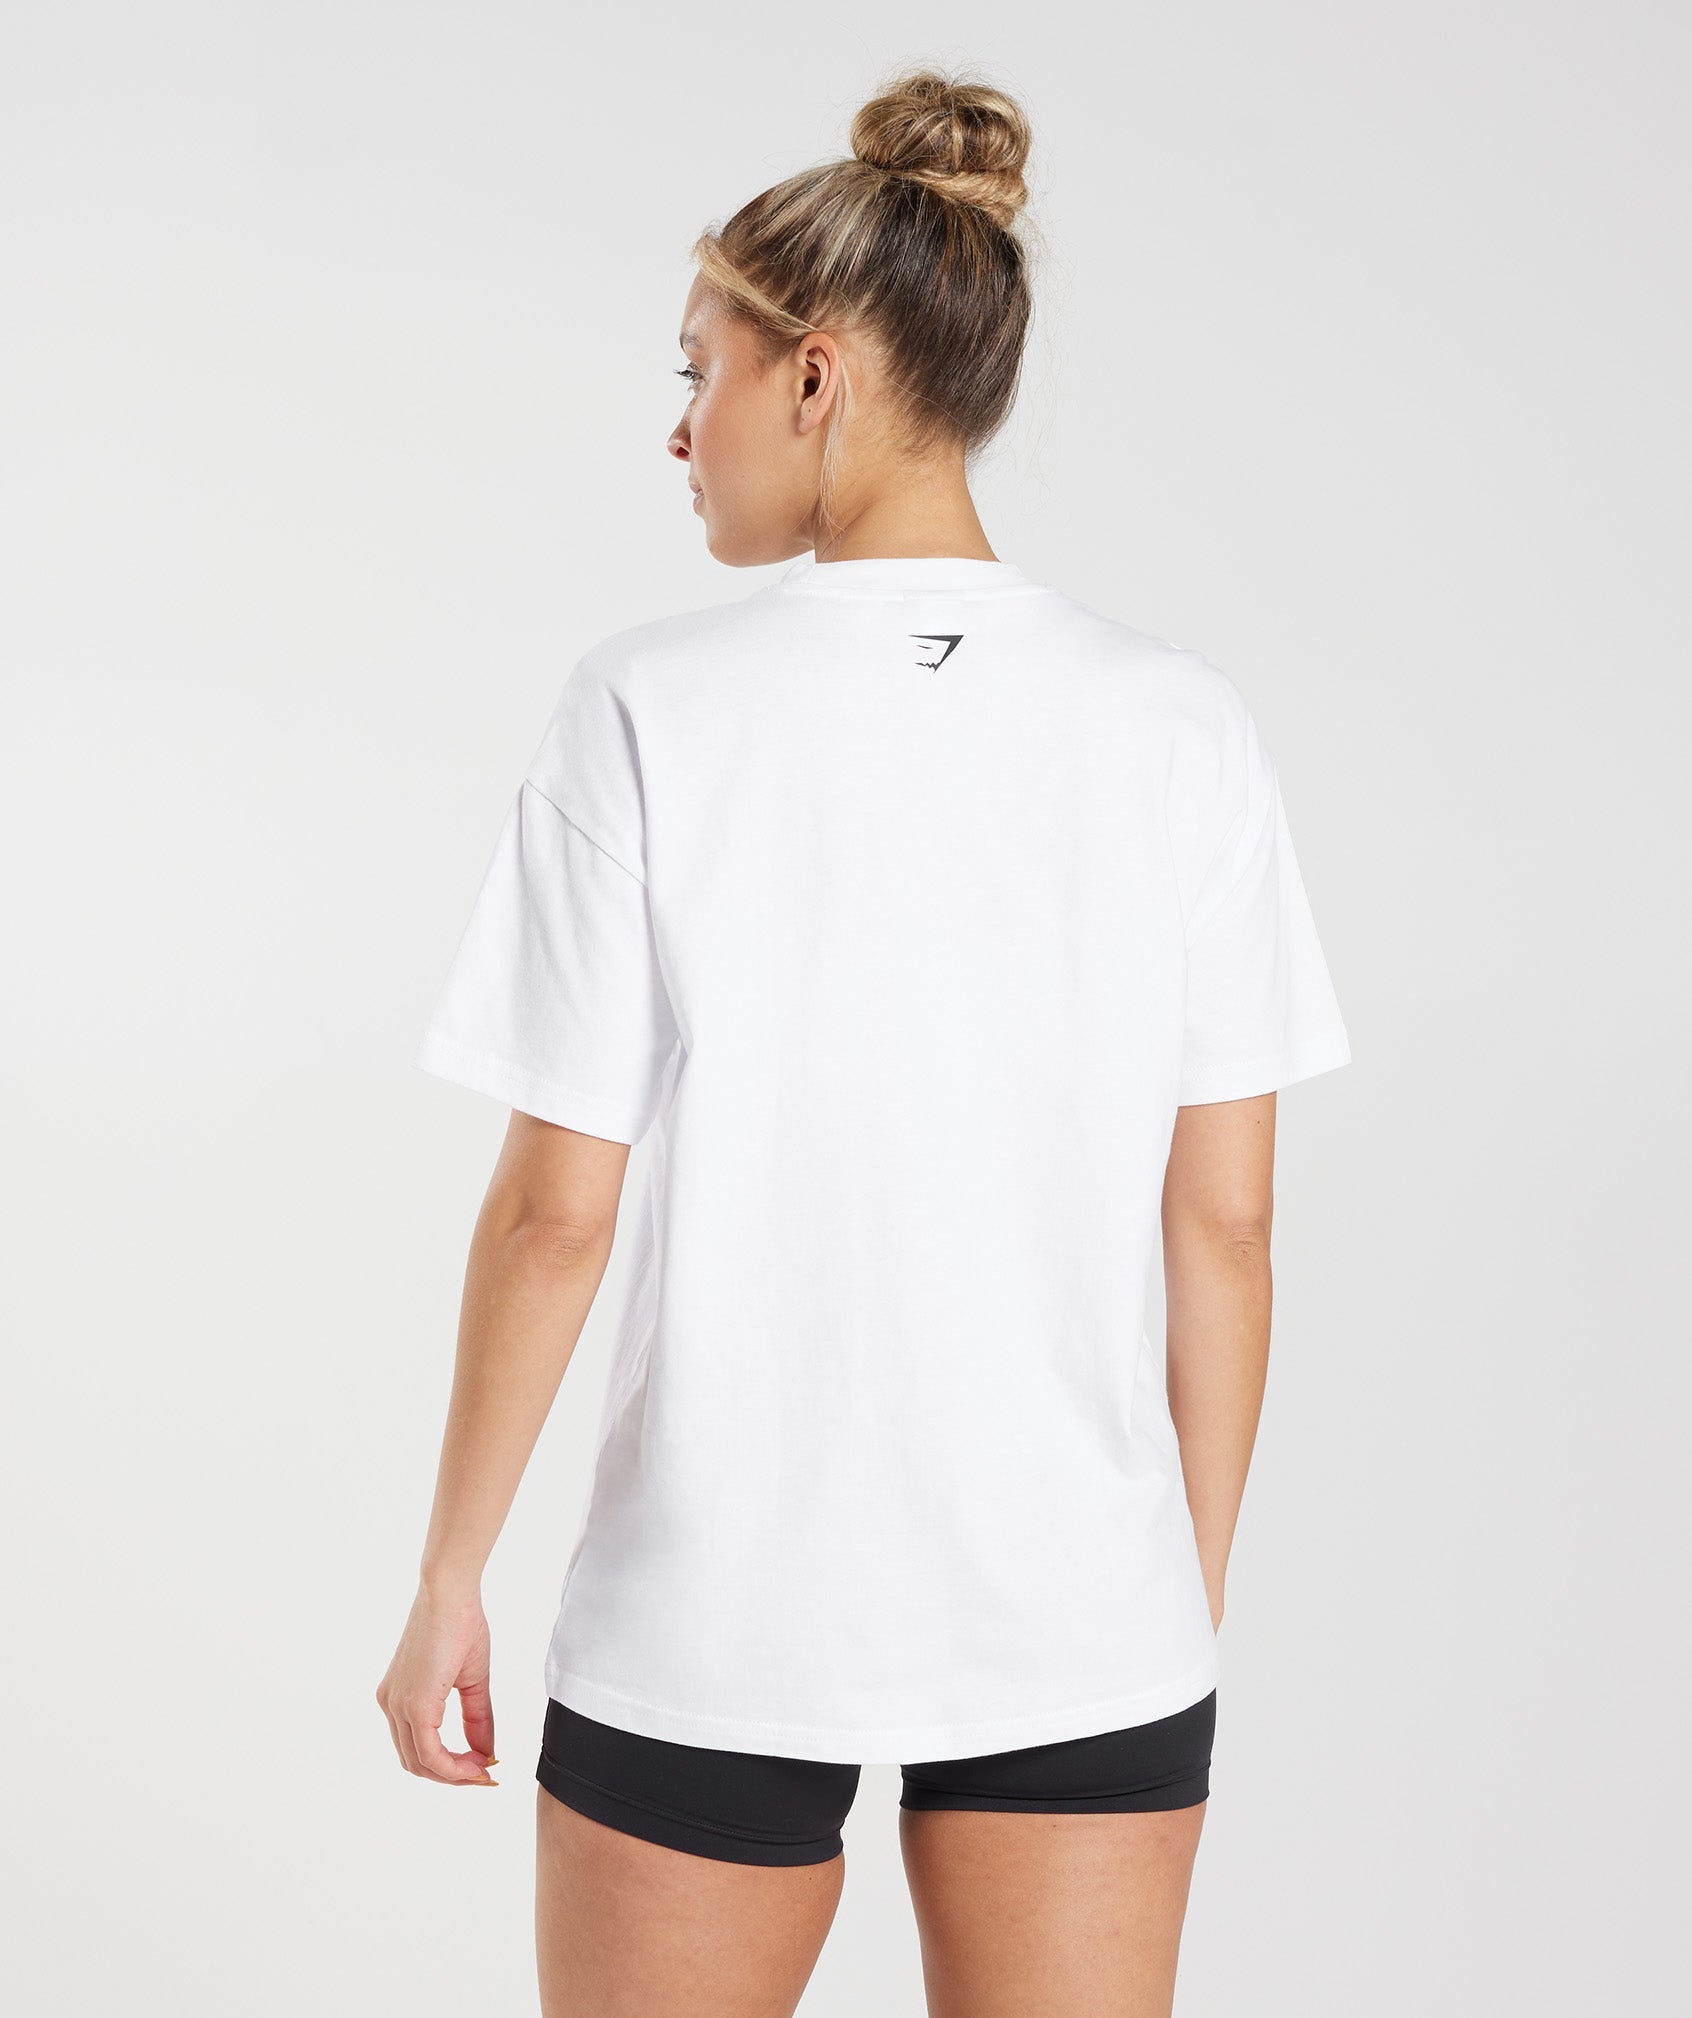 GS Fuel Oversized T-Shirt product image 2